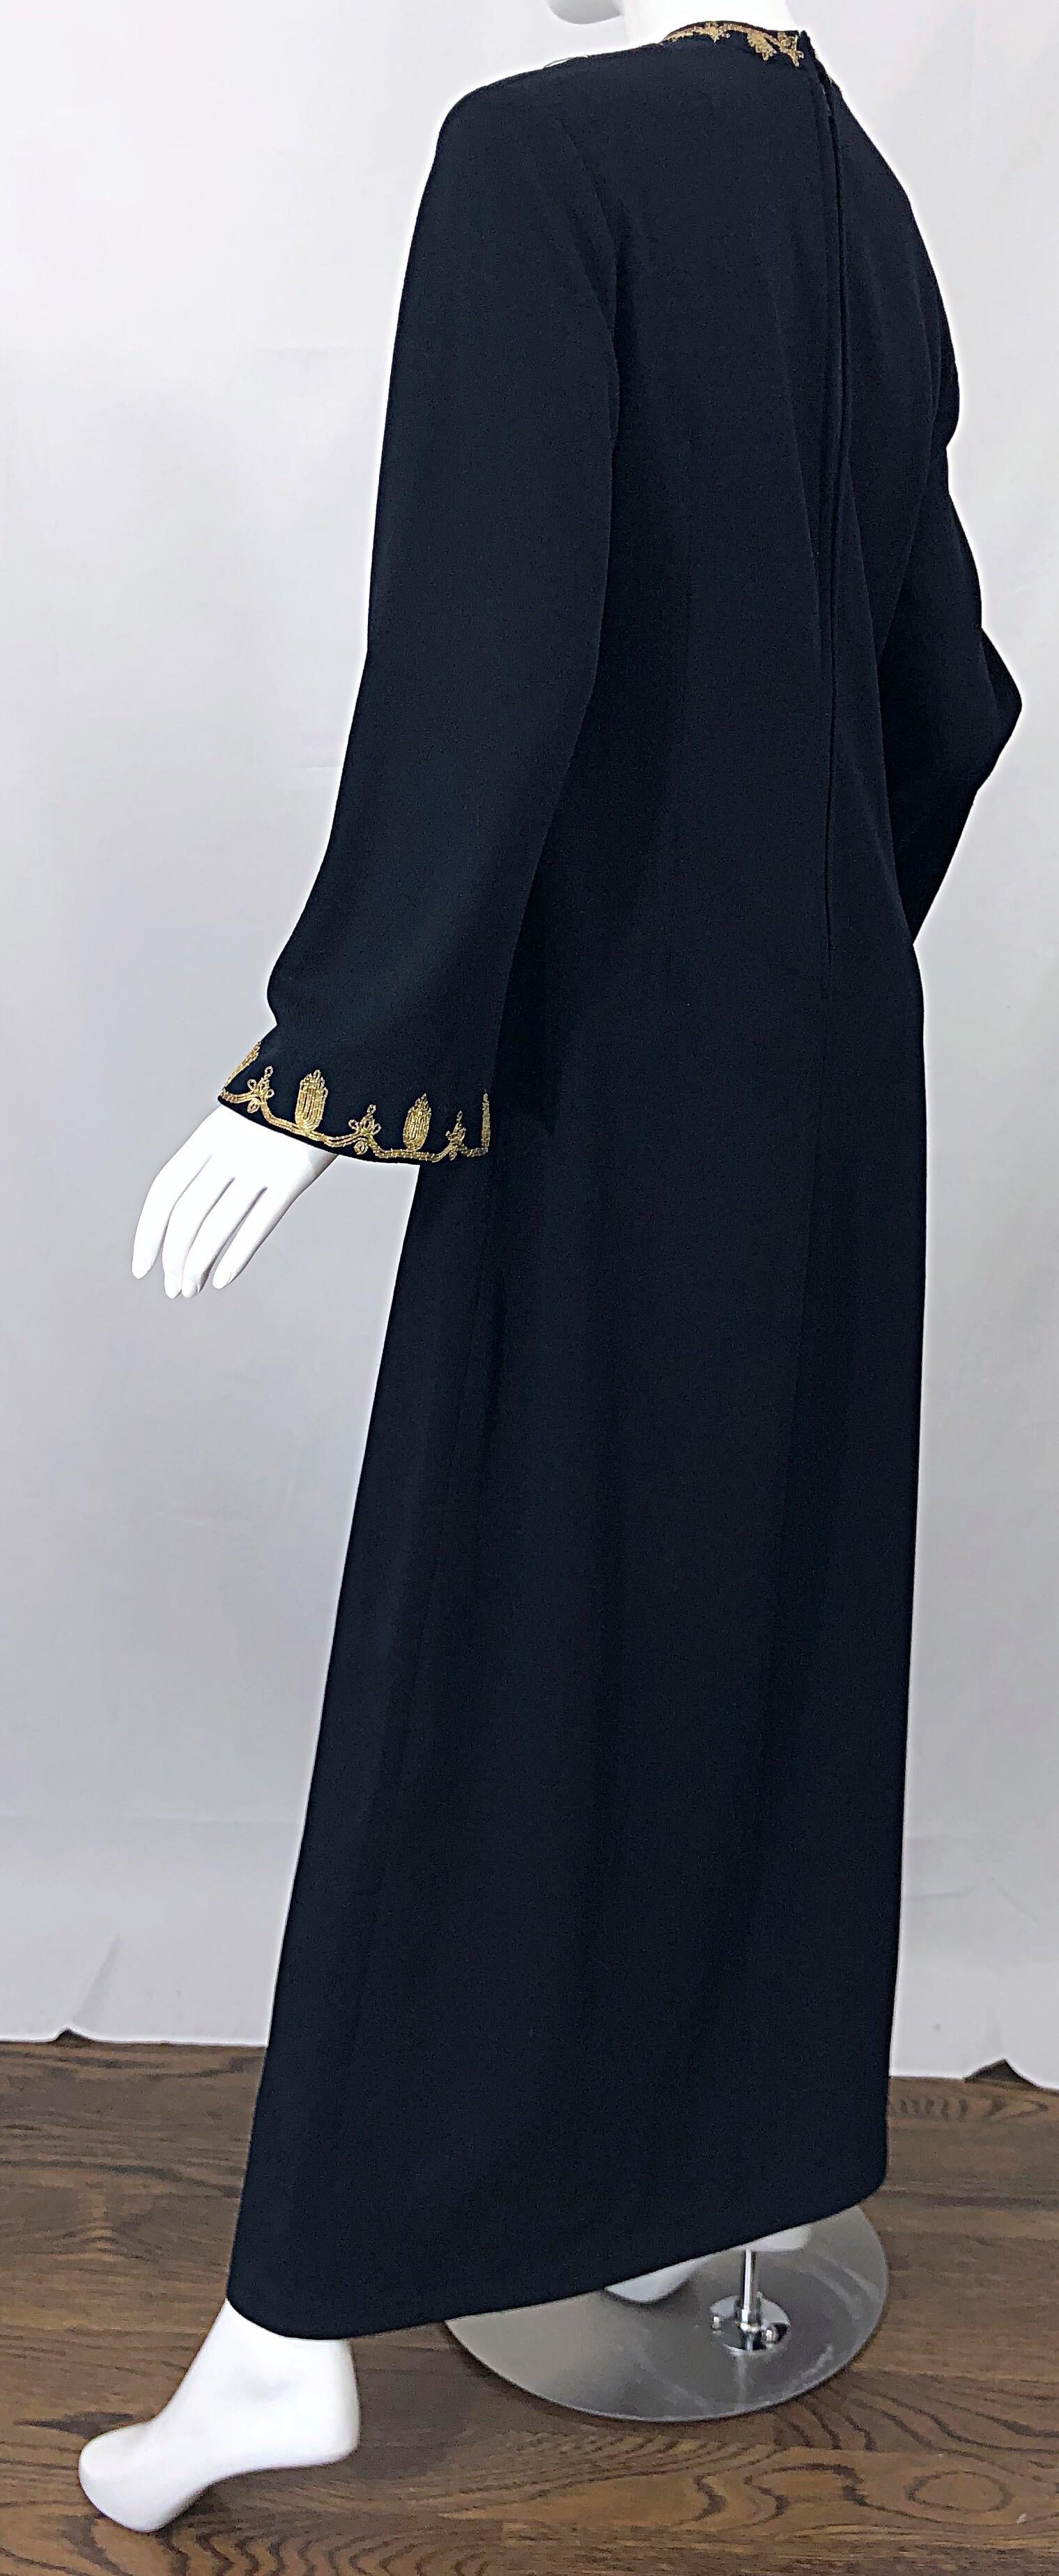 1970s Moroccan Black + Gold Metal Embroidered Vintage 70s Caftan Maxi Dress For Sale 1